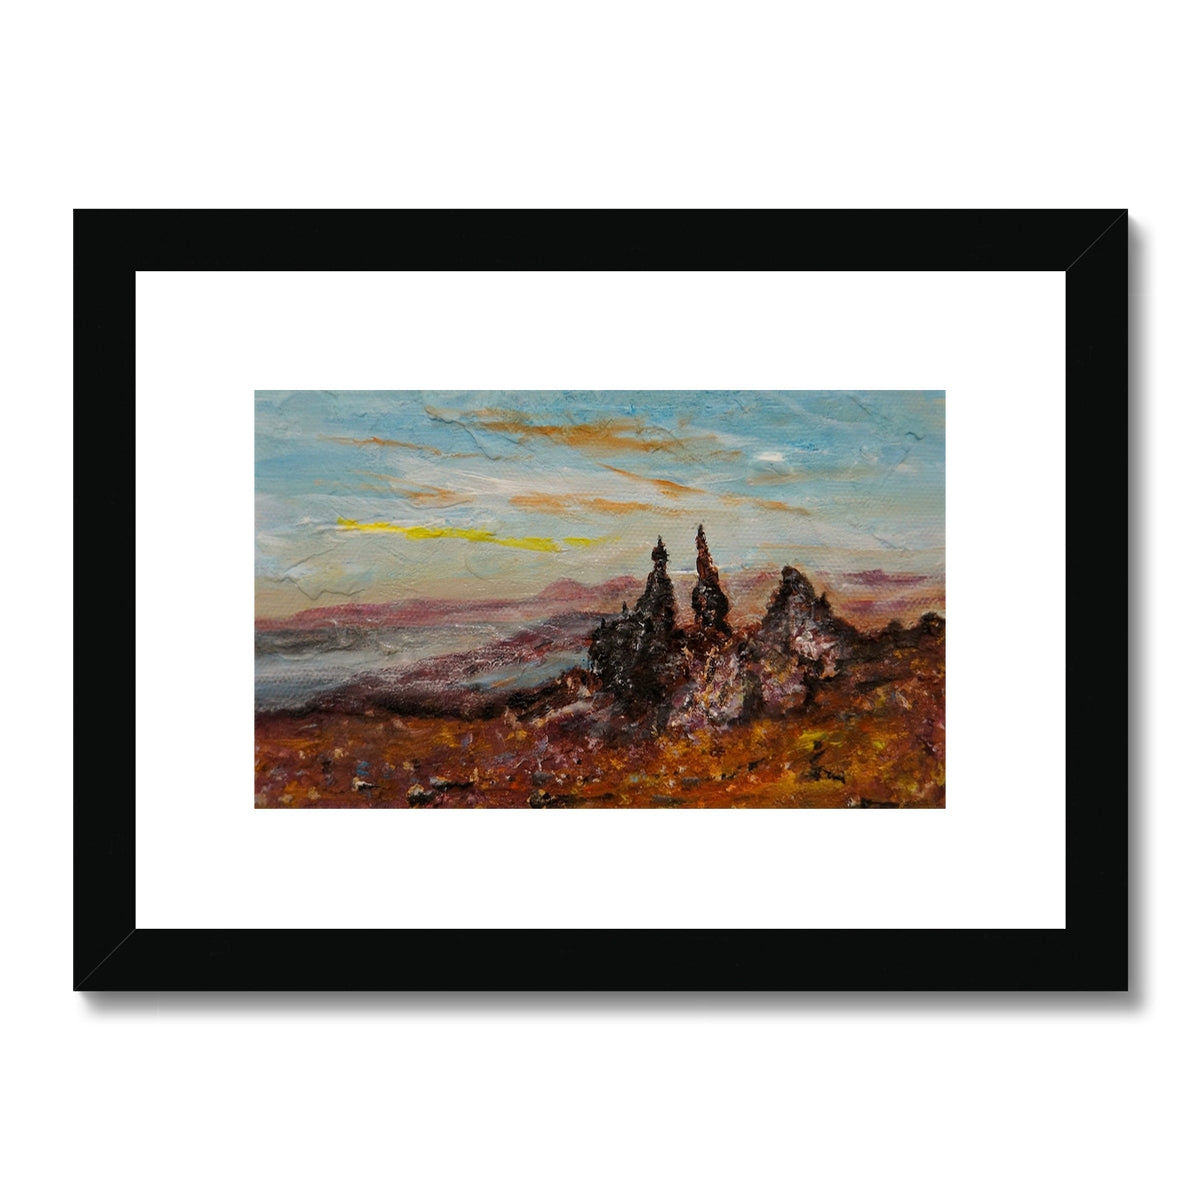 The Storr Skye Painting | Framed & Mounted Prints From Scotland-Framed & Mounted Prints-Skye Art Gallery-A4 Landscape-Black Frame-Paintings, Prints, Homeware, Art Gifts From Scotland By Scottish Artist Kevin Hunter